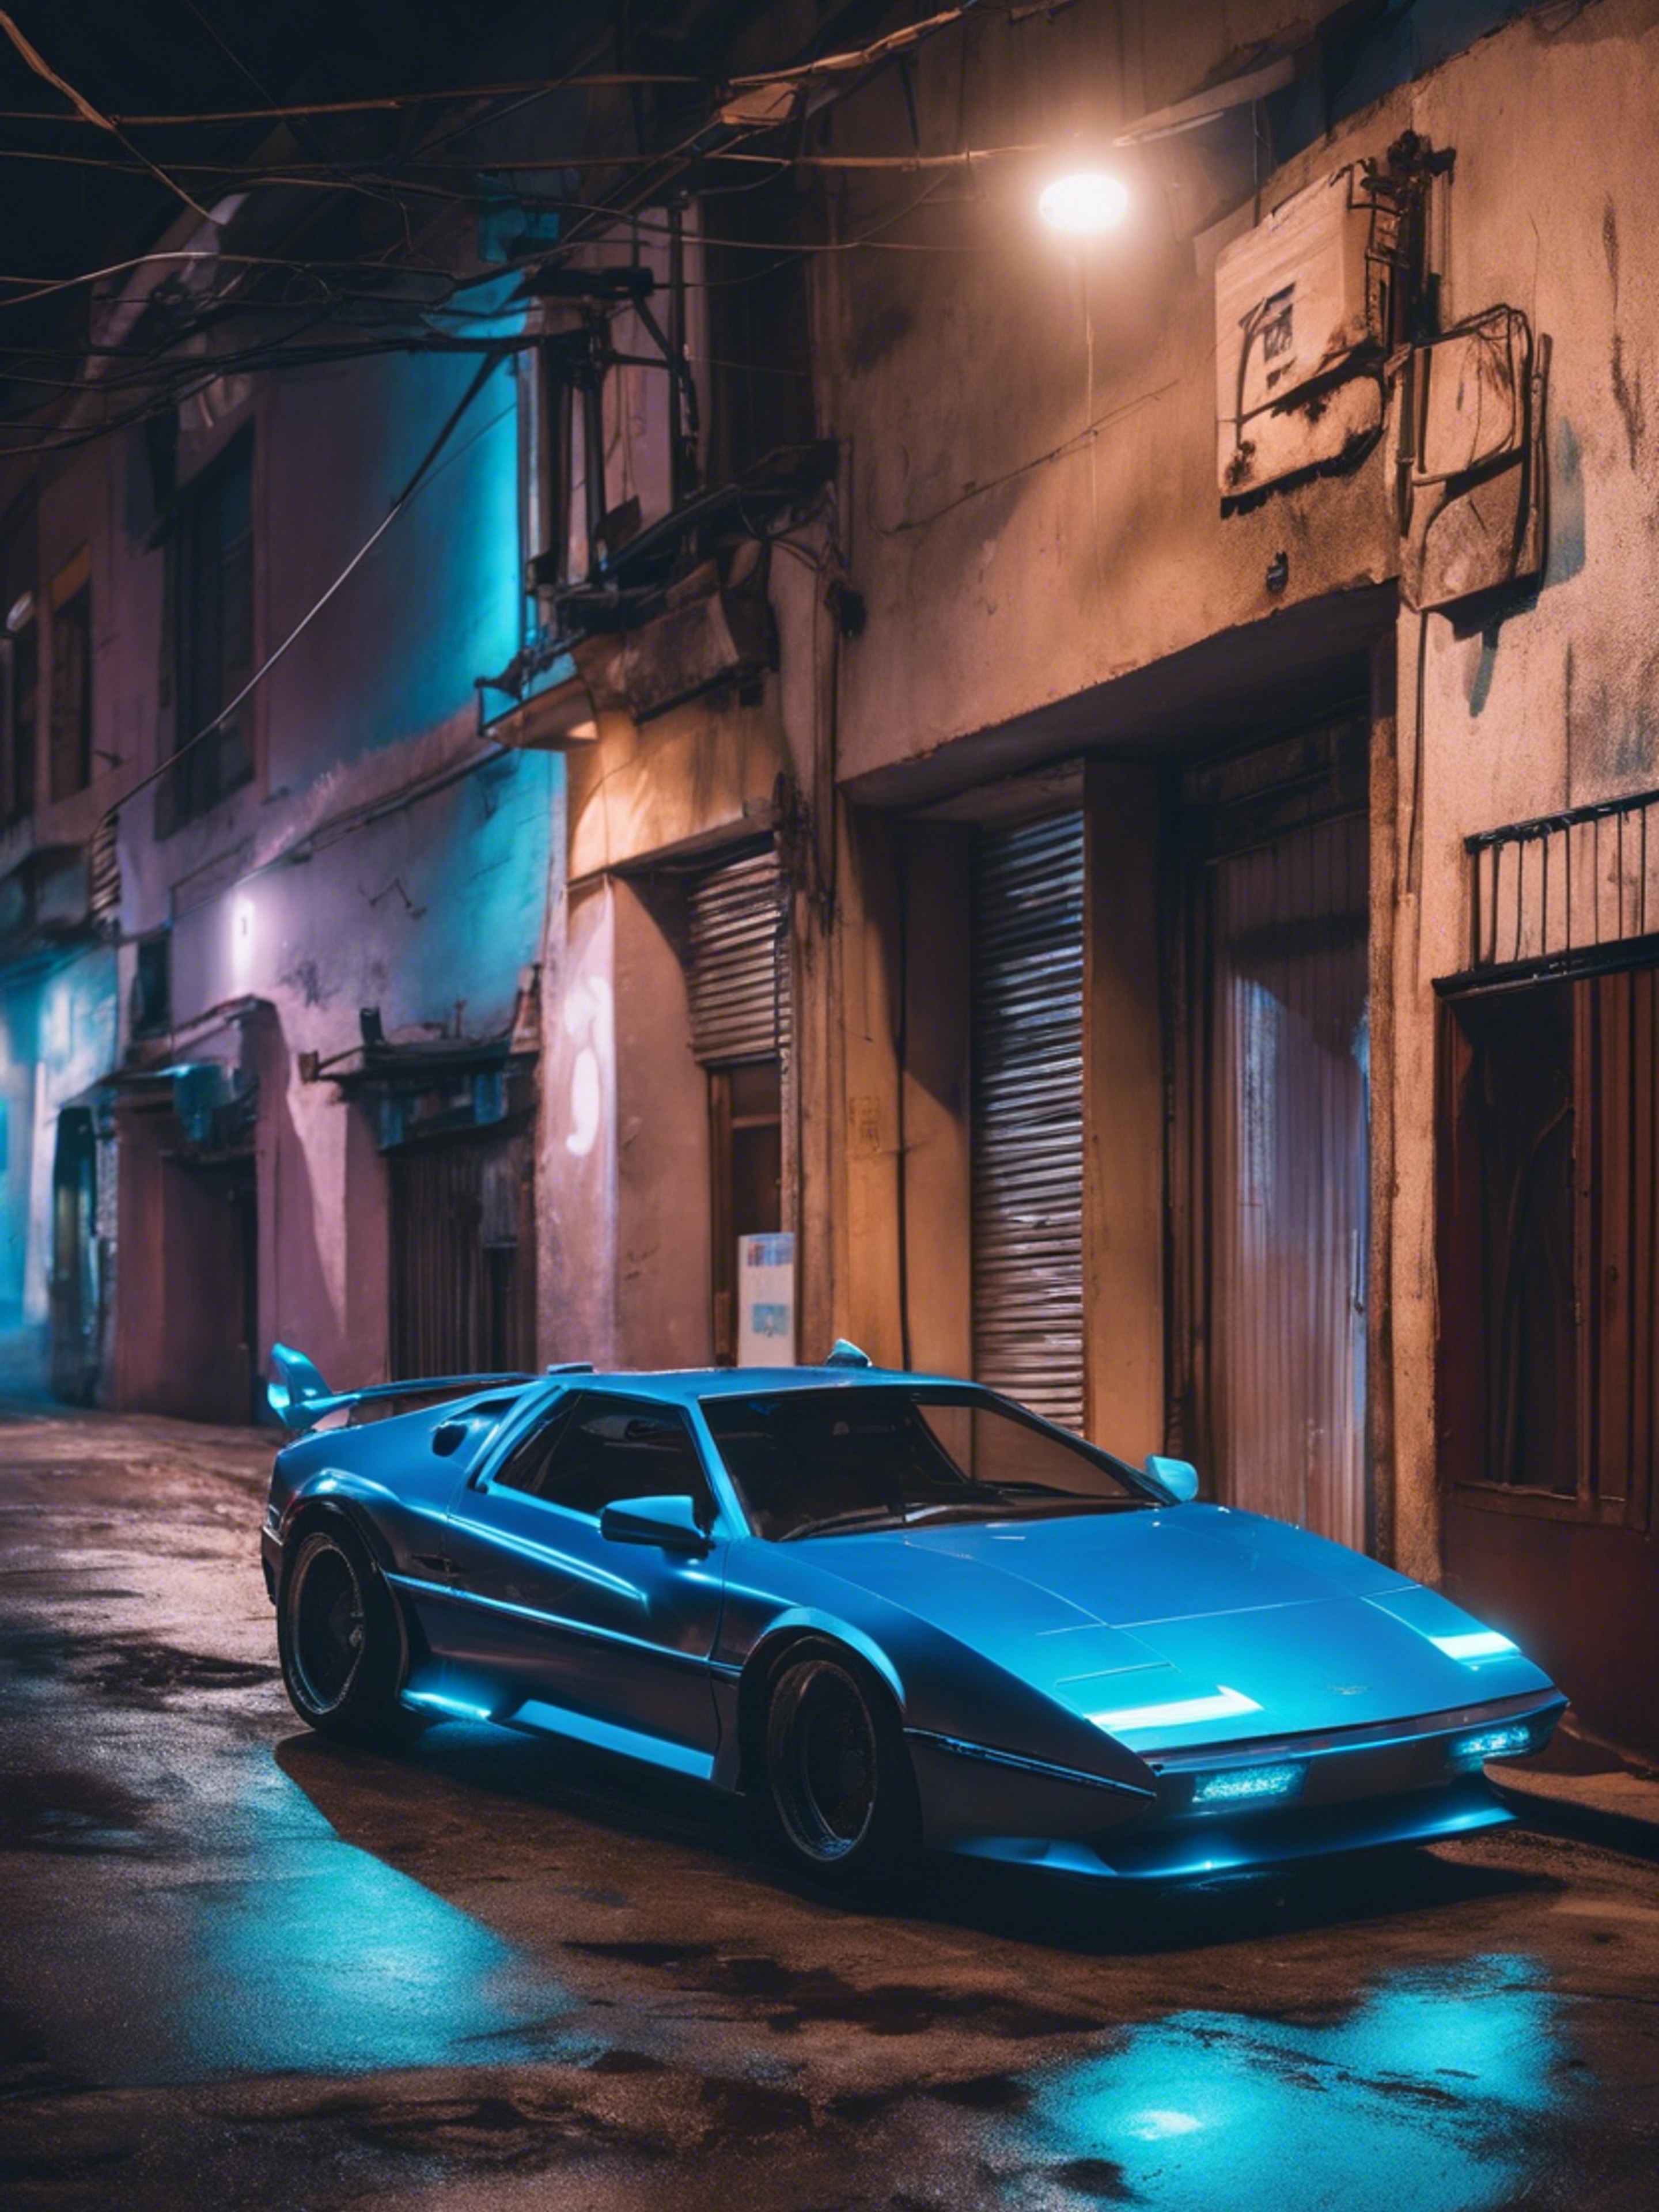 A cyberpunk themed sports car glowing with neon blue underlights parked in a dim alley. Шпалери[b442527eec5a4d00a6f1]